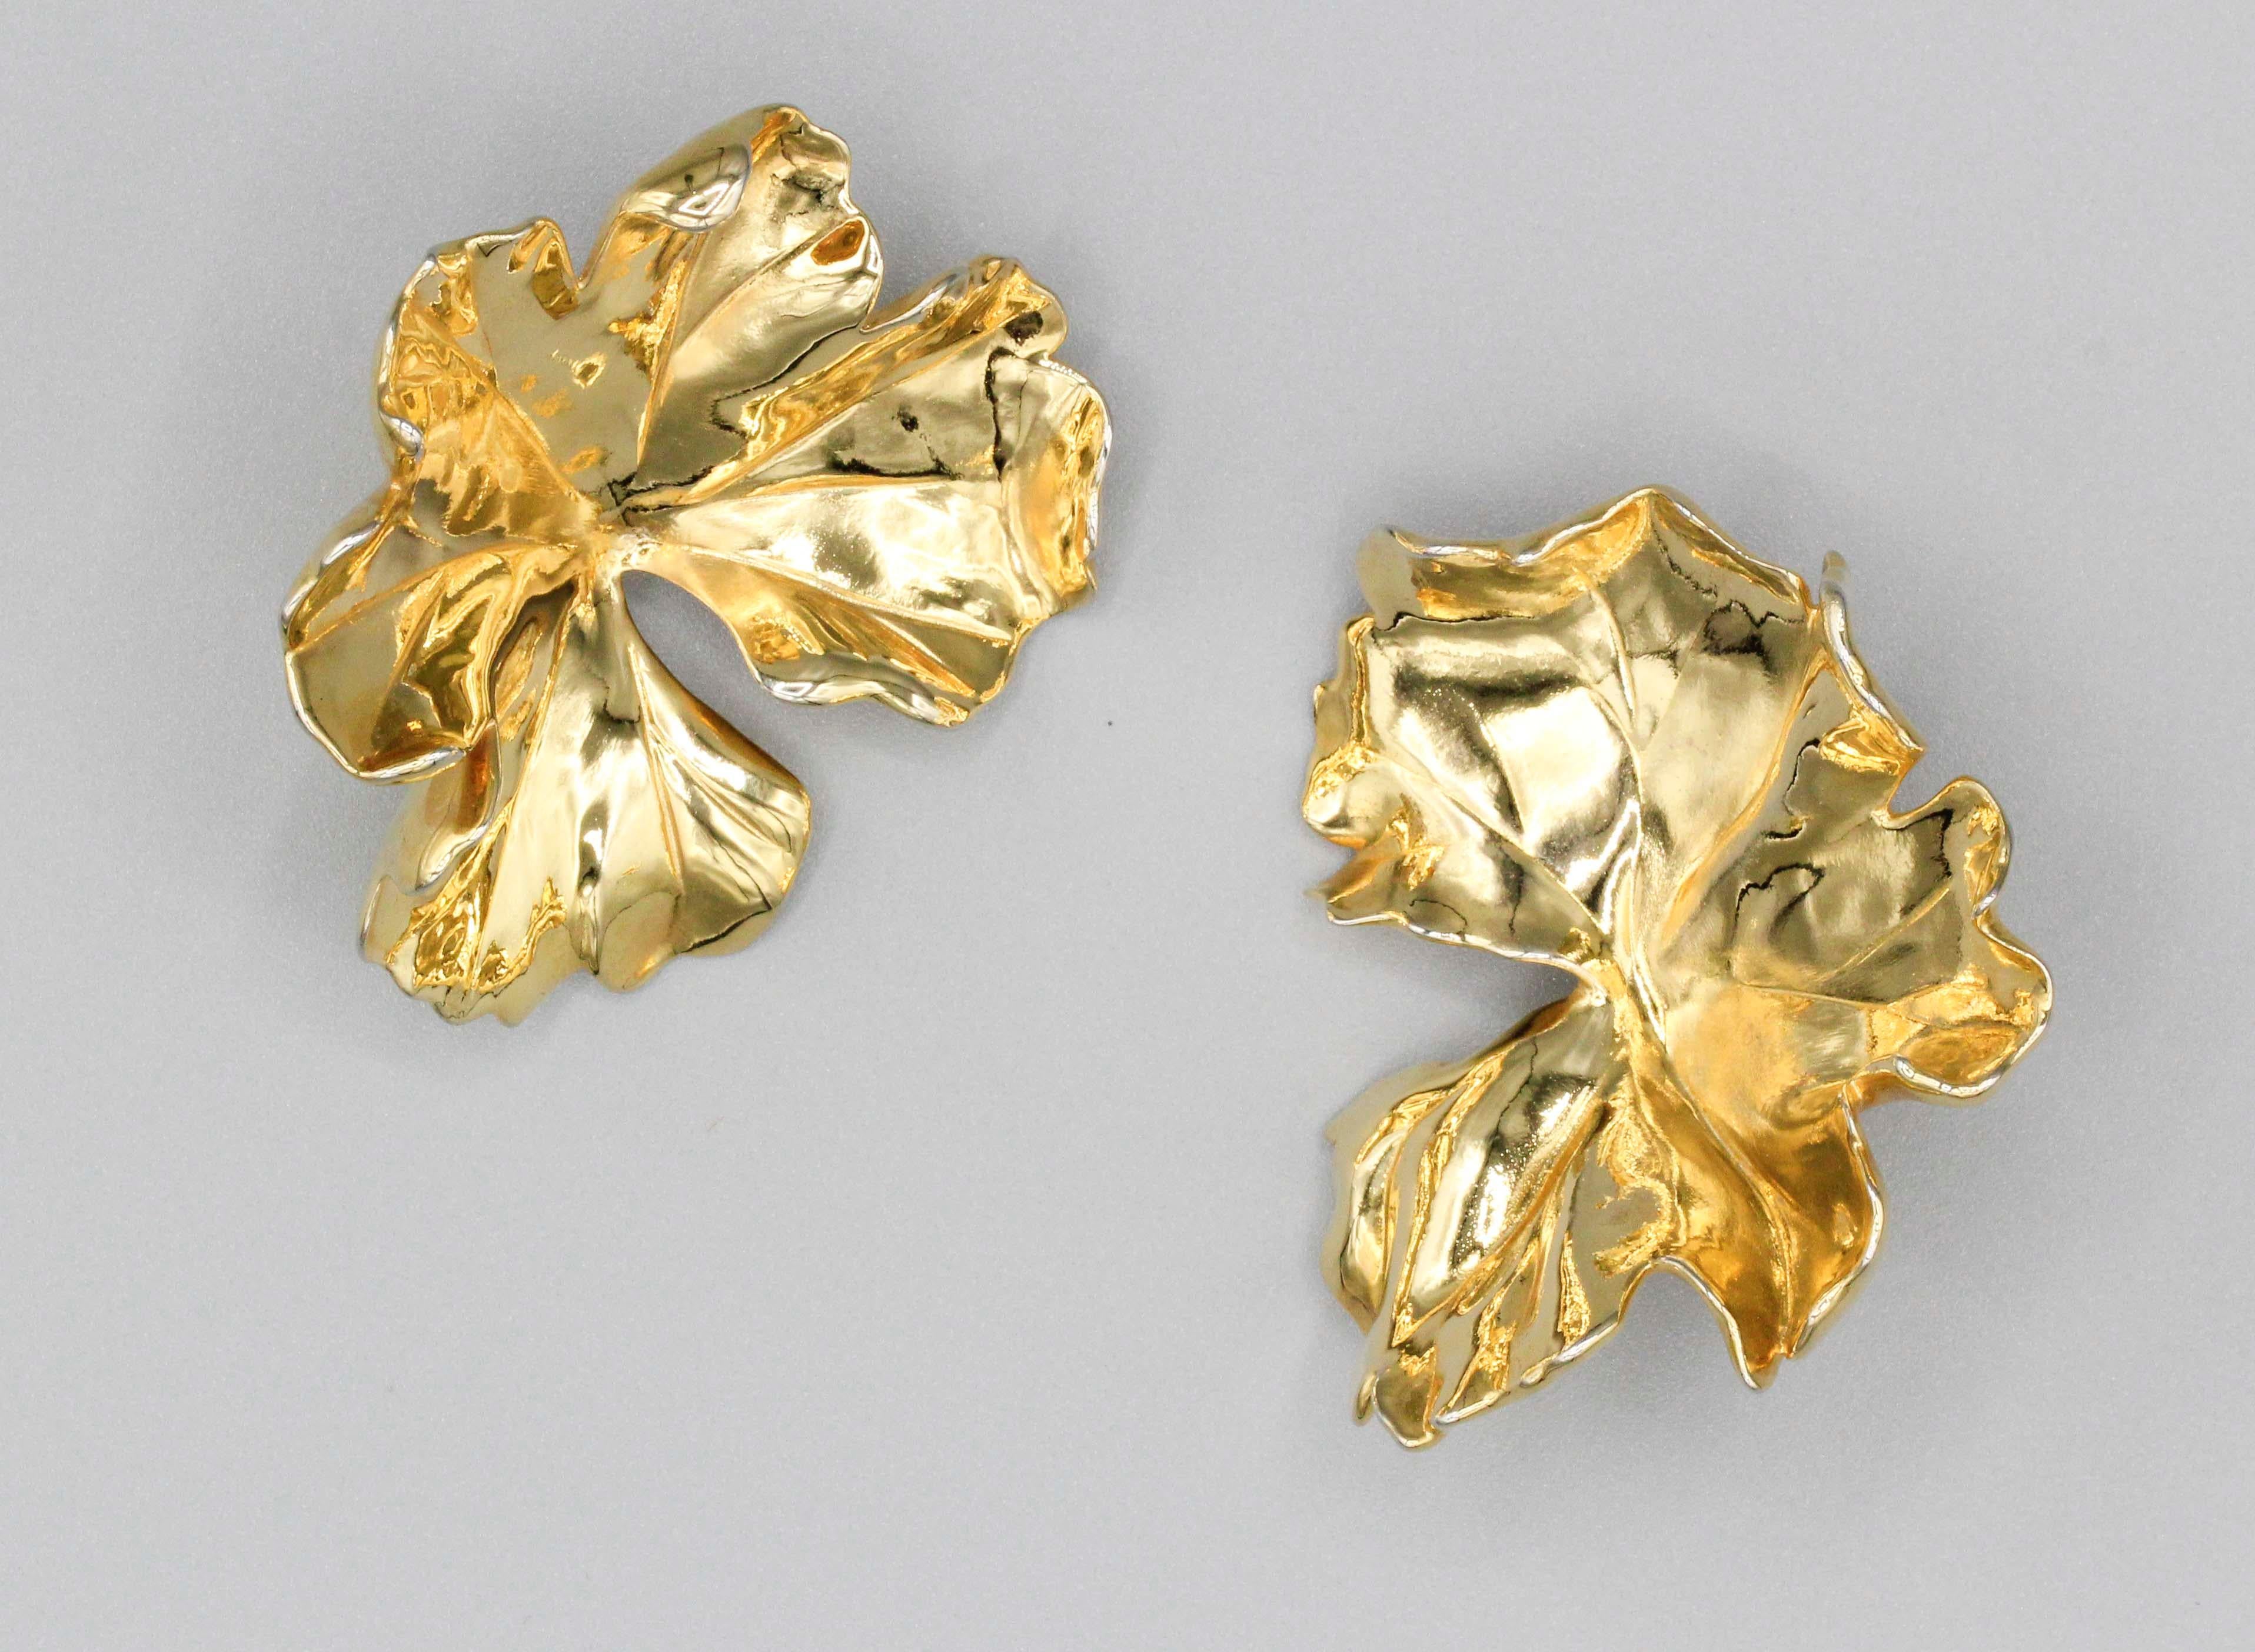 Impressive gold-tone aluminum geranium earrings by JAR, Joel Arthur Rosenthal. These are the large model and are made in limited edition. Pouch is included in sale. Beautiful workmanship and highly collectible.

Hallmarks: JAR, Paris, reference